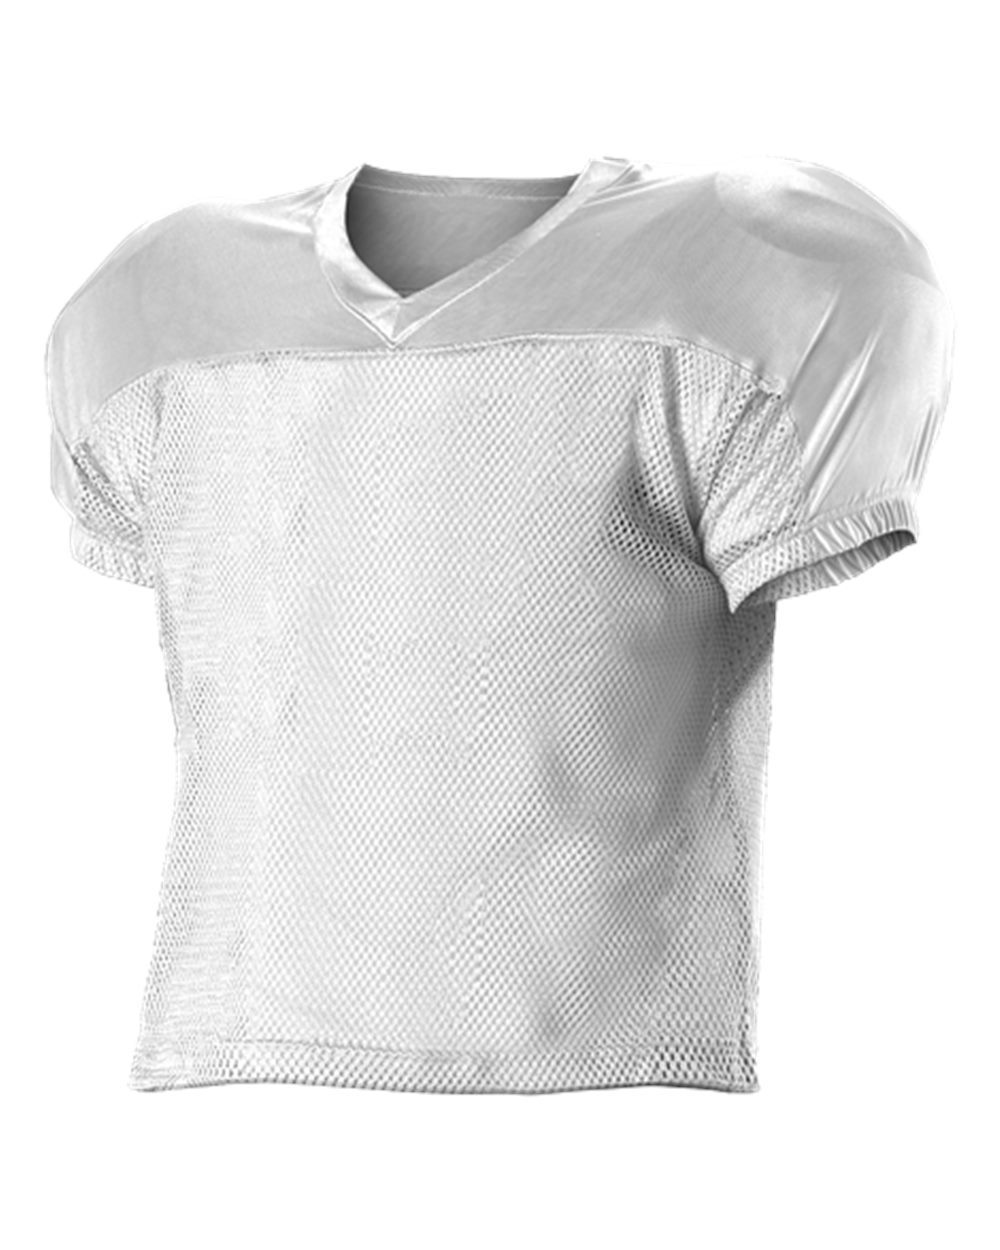 Orange Grey Blank Custom Football Practice and Game Jerseys | YoungSpeeds Integrated Pants